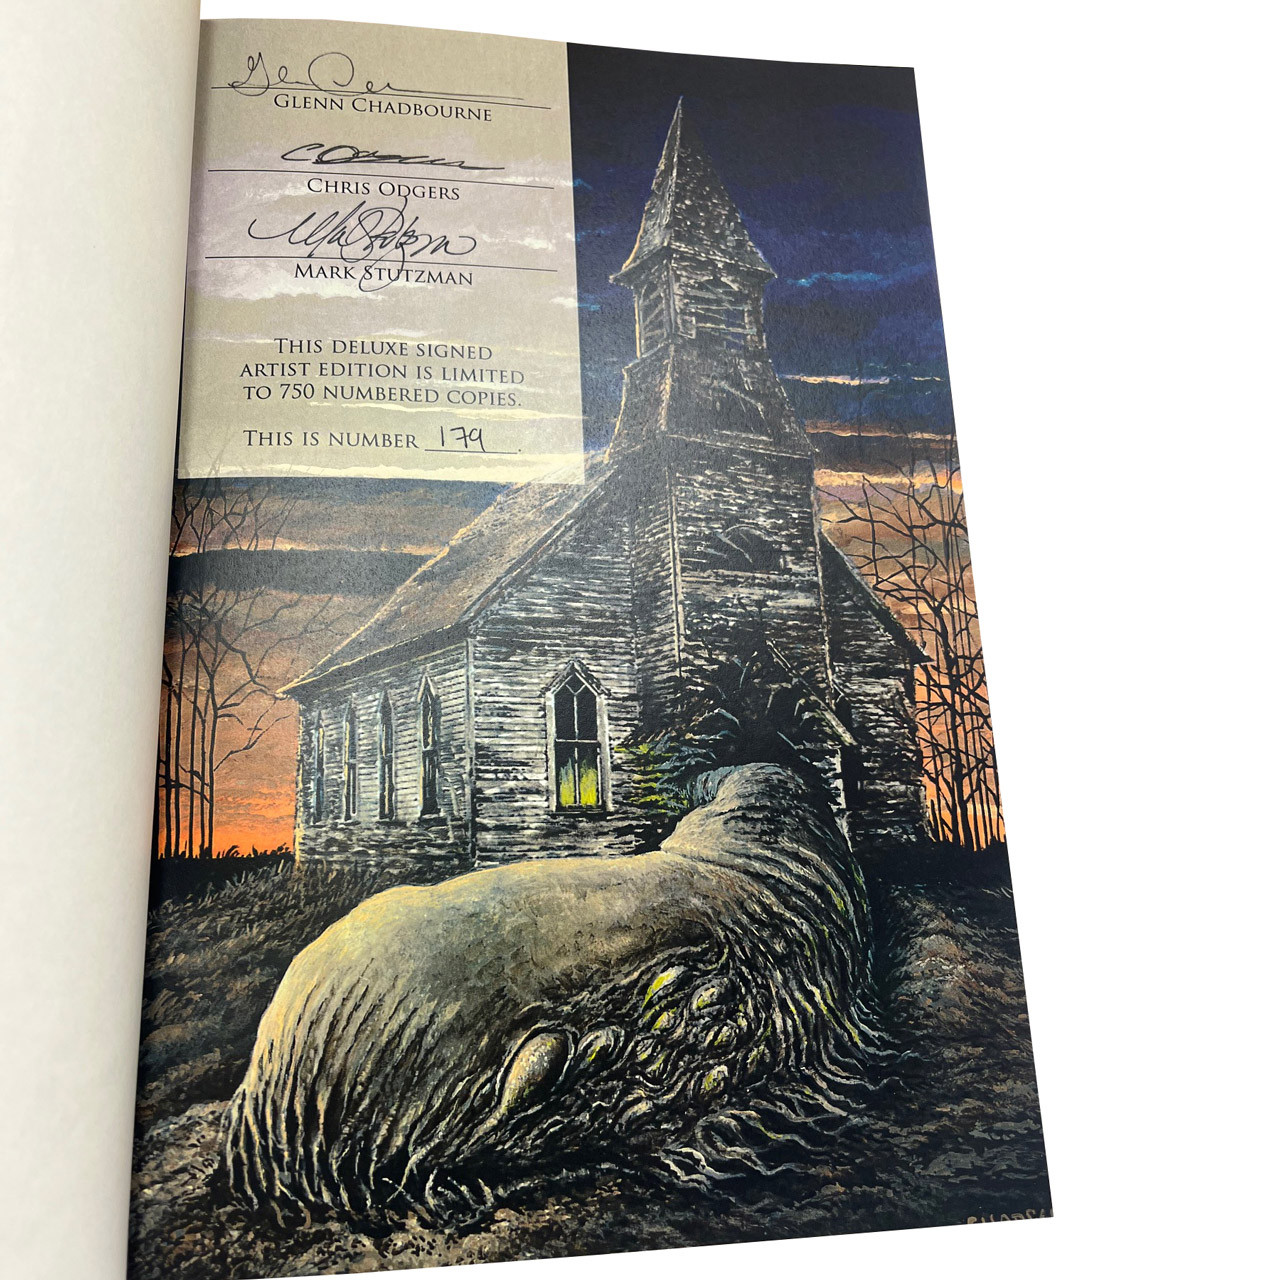 Stephen King  "Night Shift" The Doubleday Years, Signed Limited Artist Edition No. 179 of 750 w/Matching Artwork Portfolio [Very Fine]